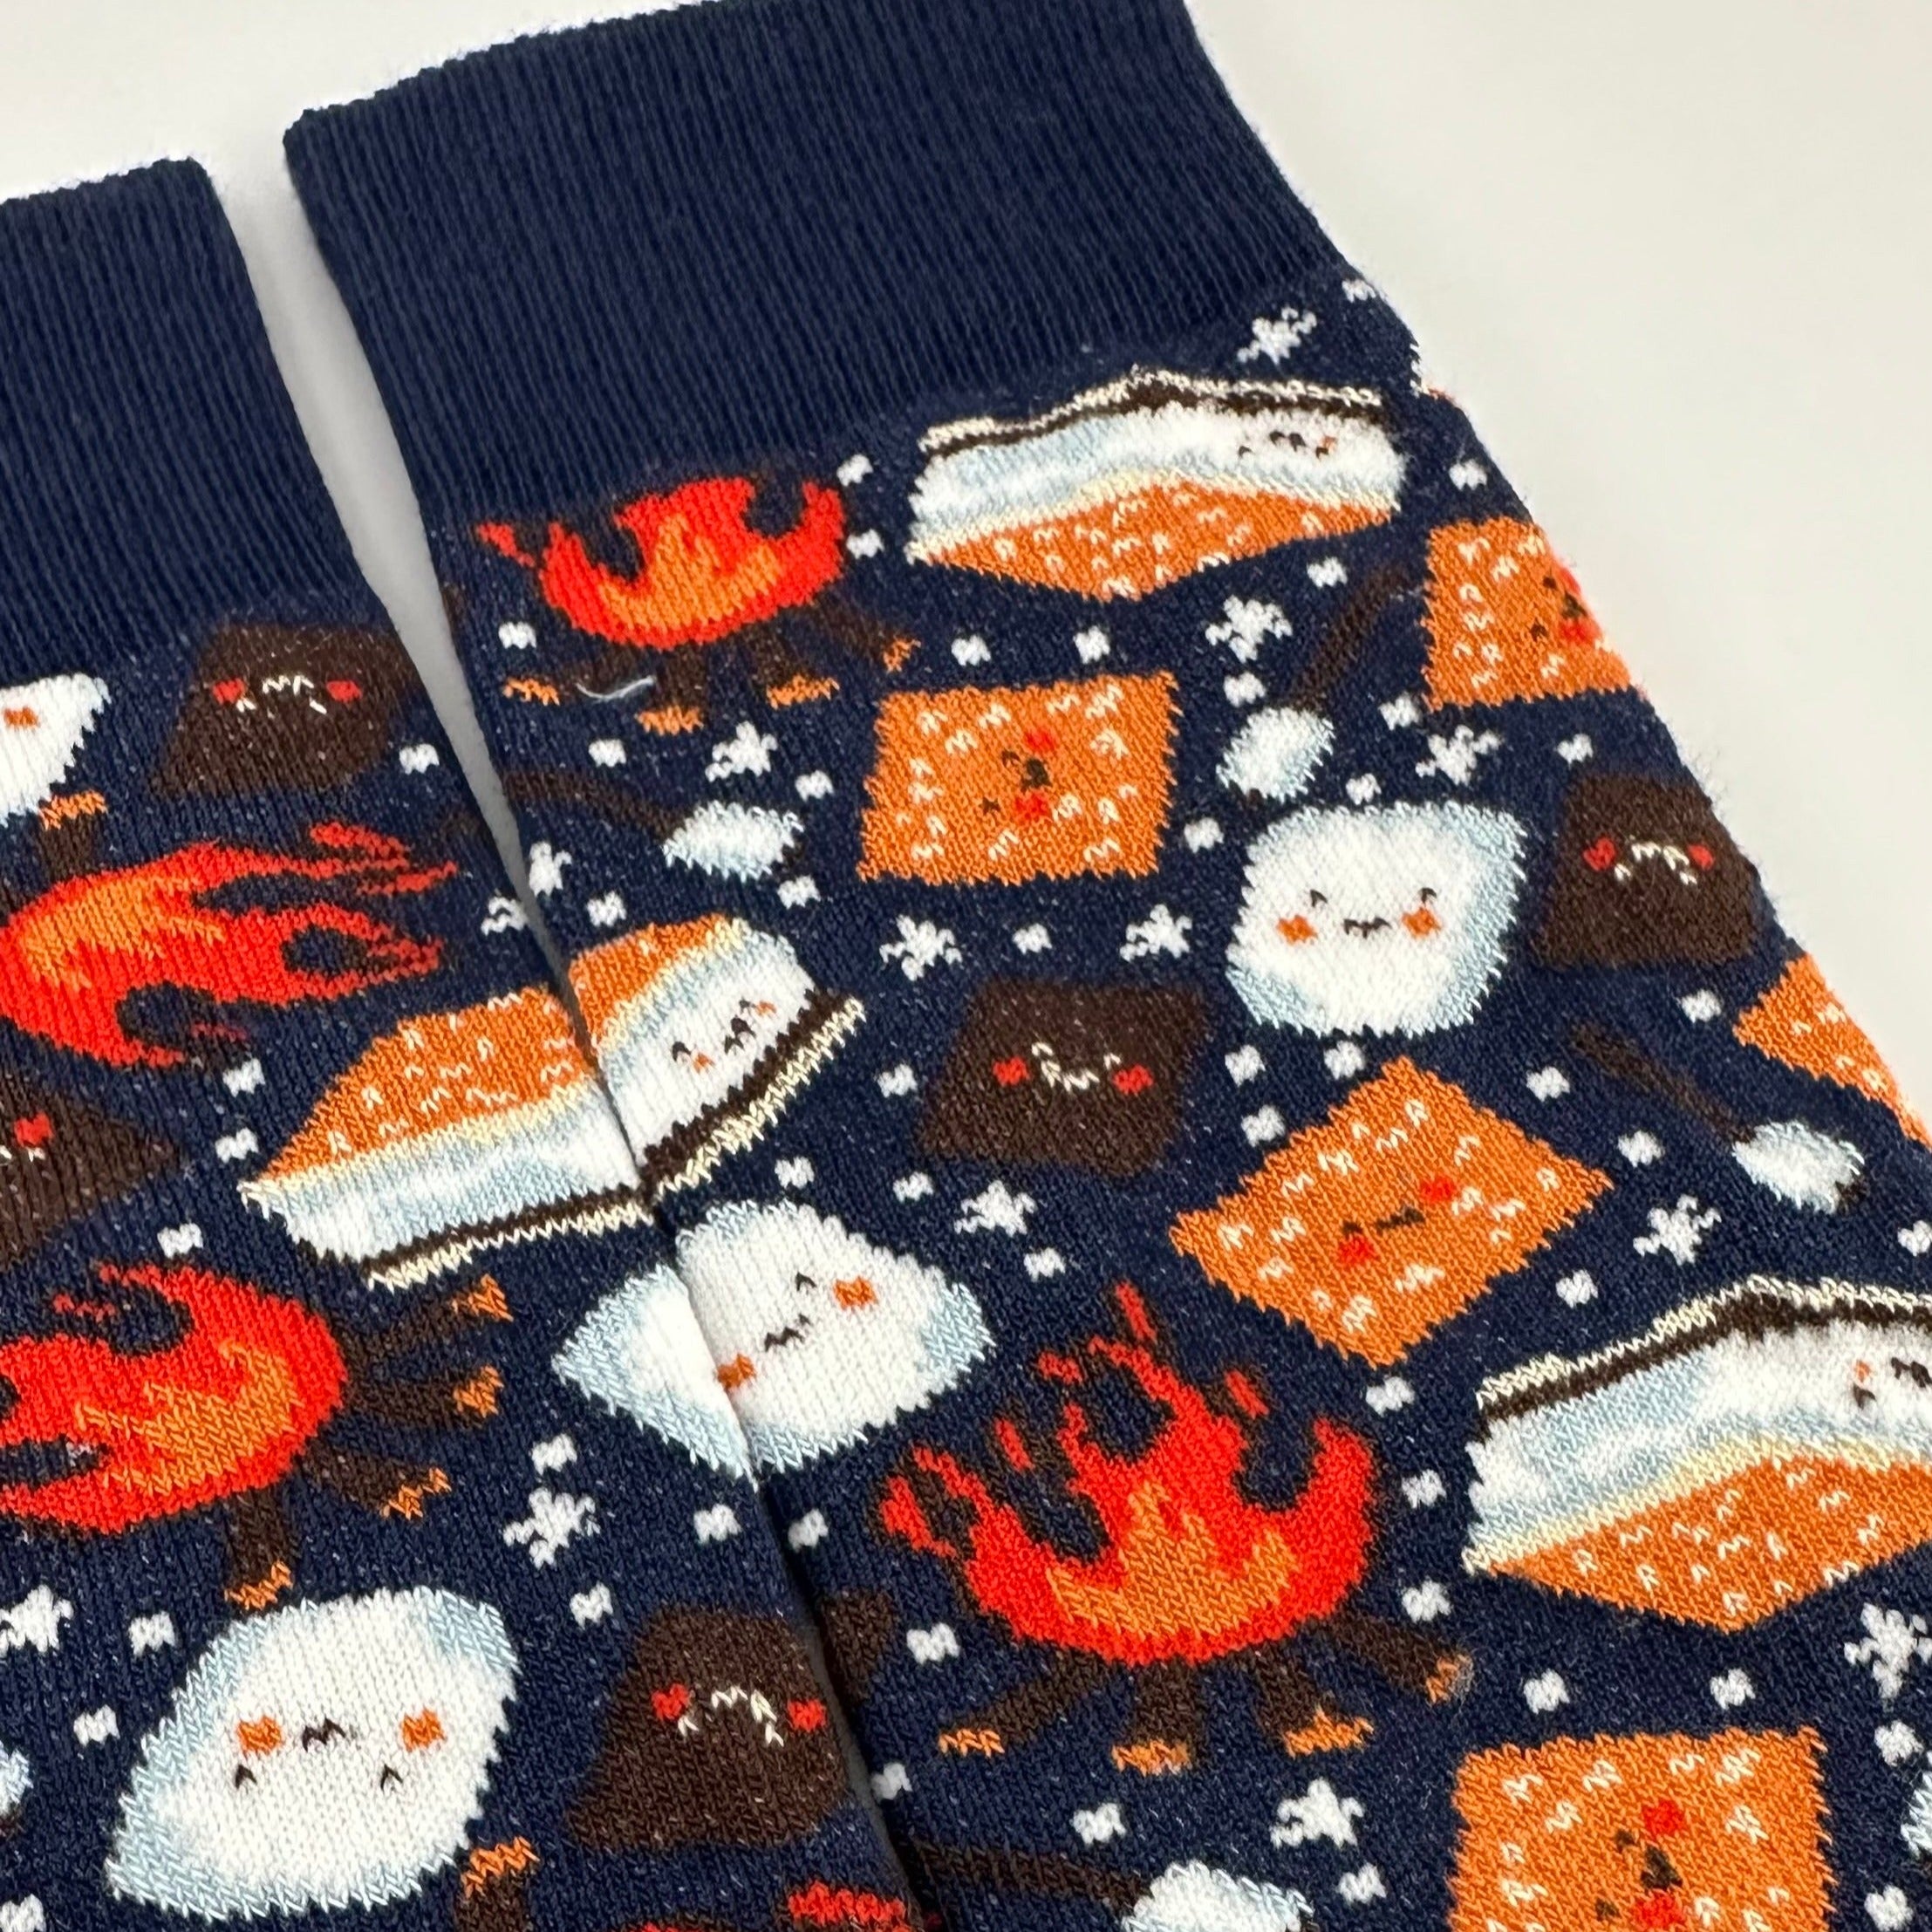 Smores Socks from the Sock Panda (Adult Small)